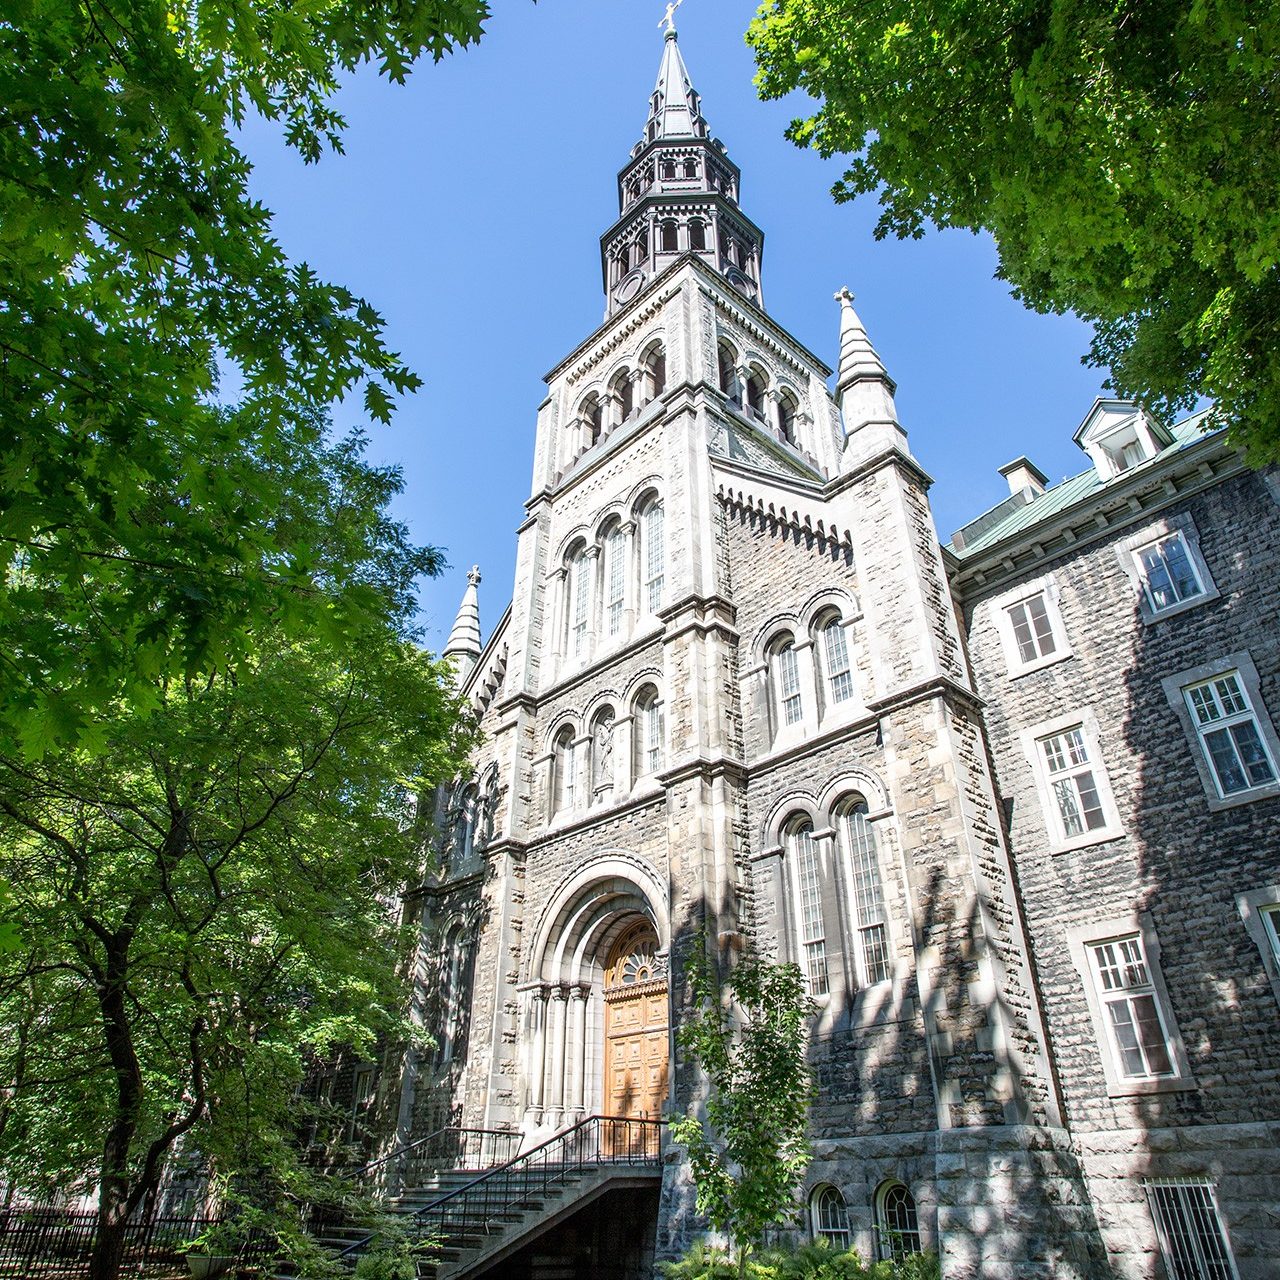 The entrance and facade of Concordia University's historic Grey Nuns residence on a sunny summer day